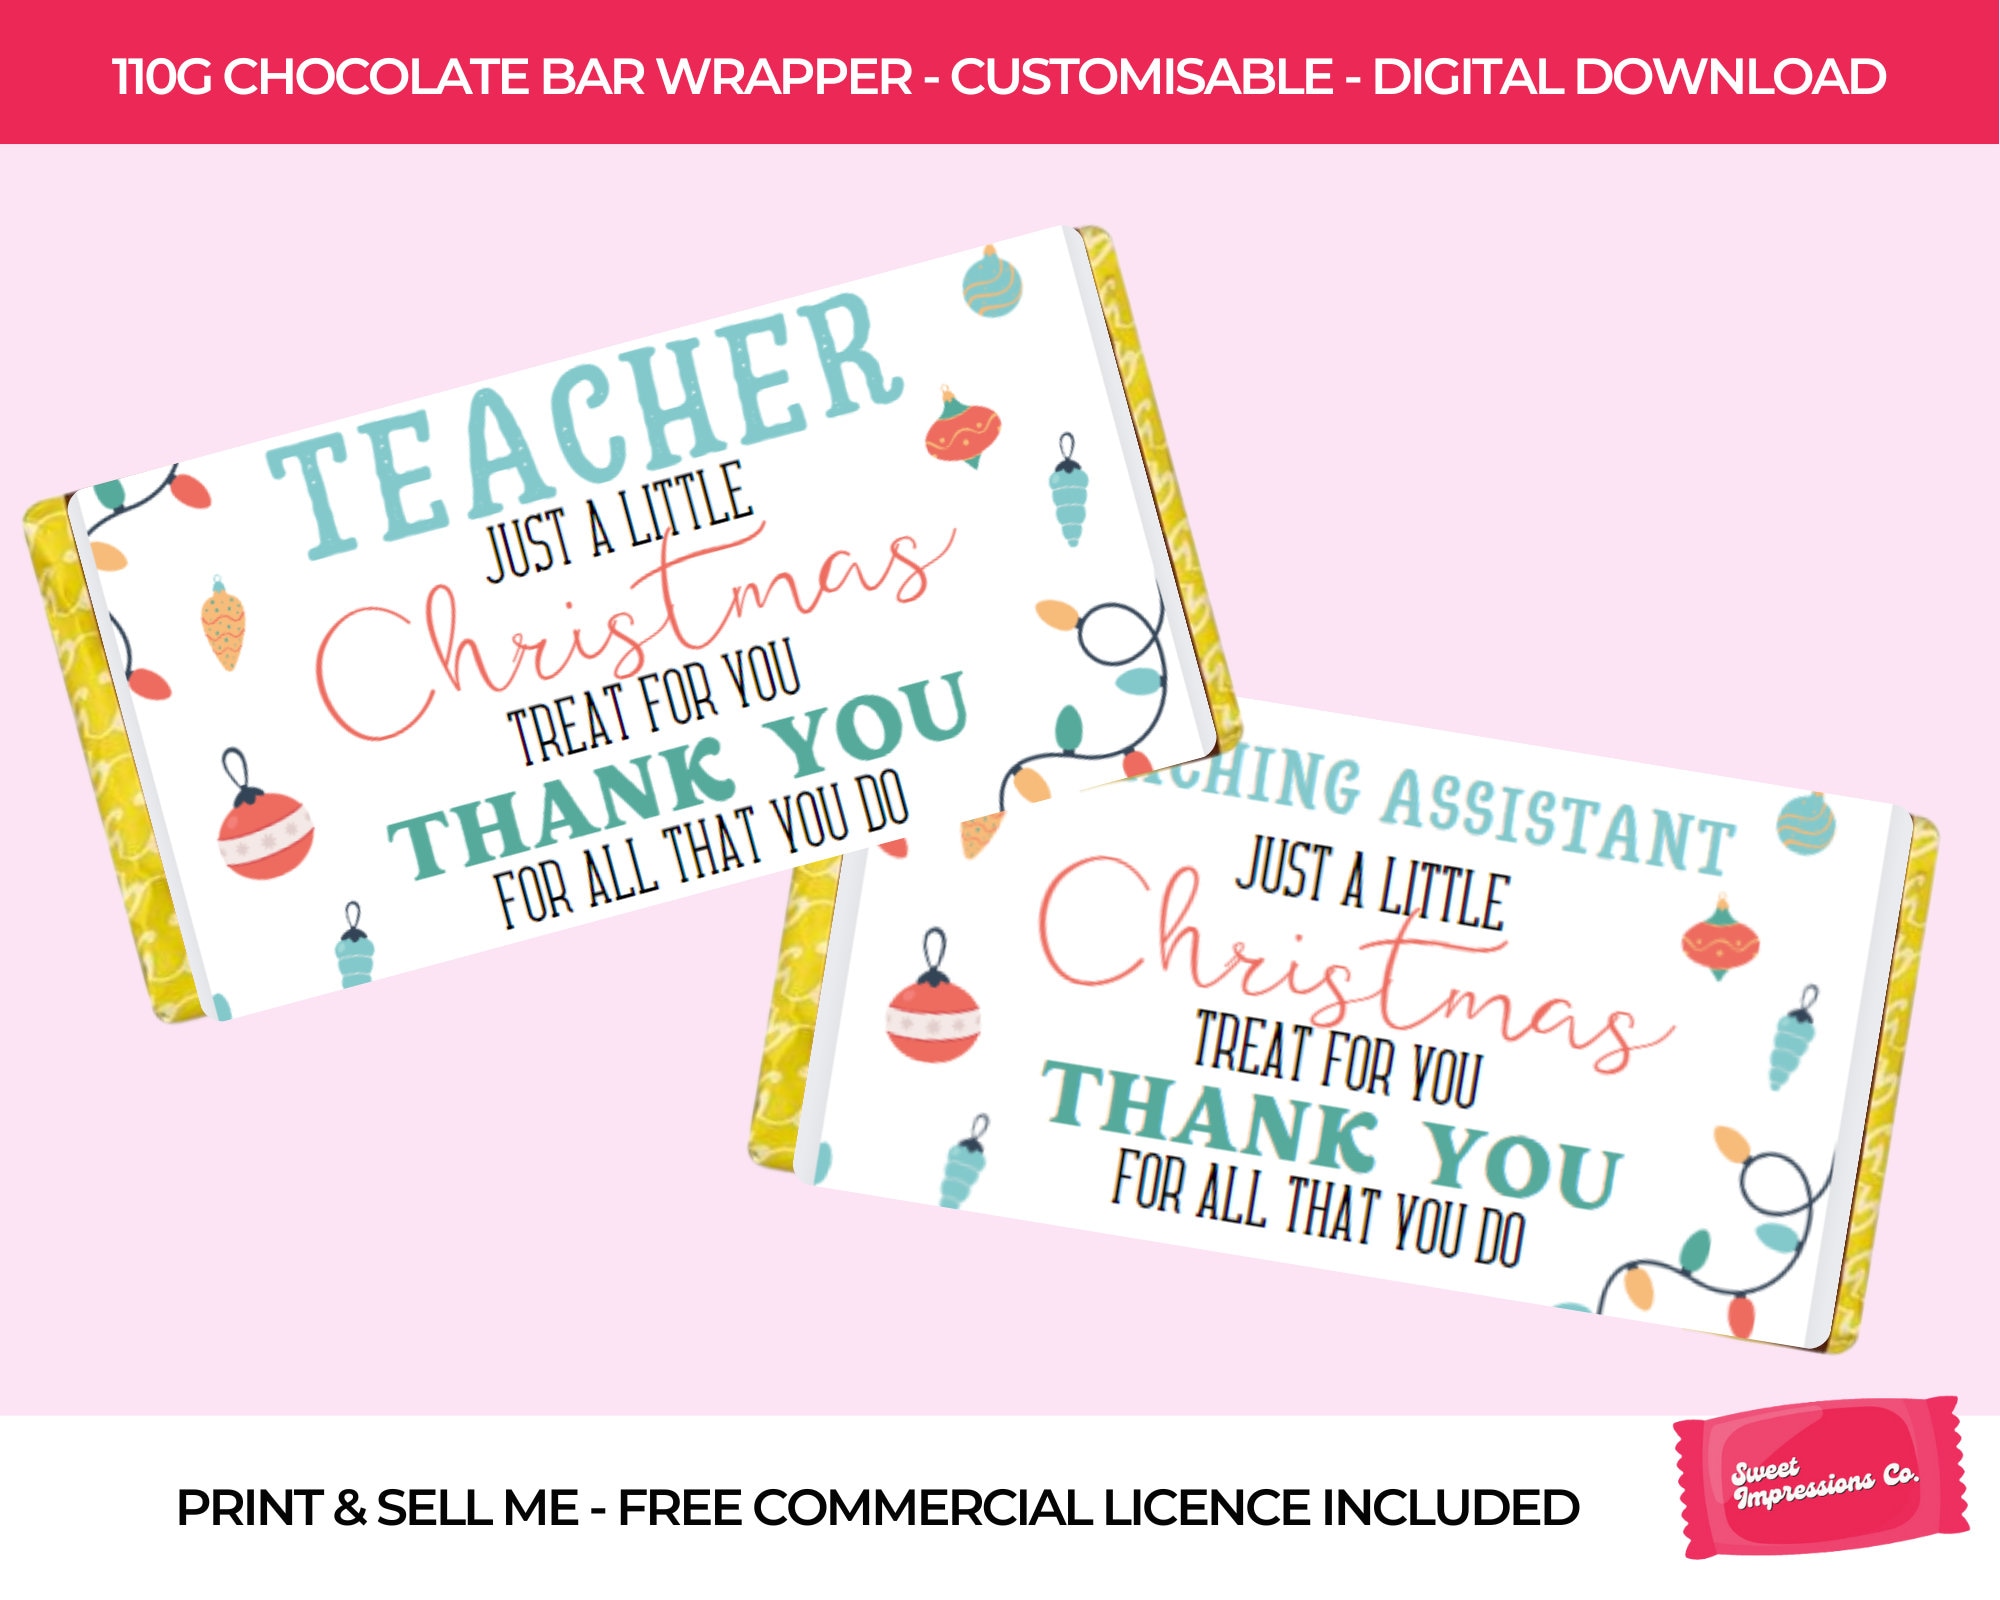 Stitch and Angel Candy Bar Wrapper 5.2 X 5.8 Printable Labels Bar Wrapper  Kids Birthday Template Printable DIGITAL FILE 